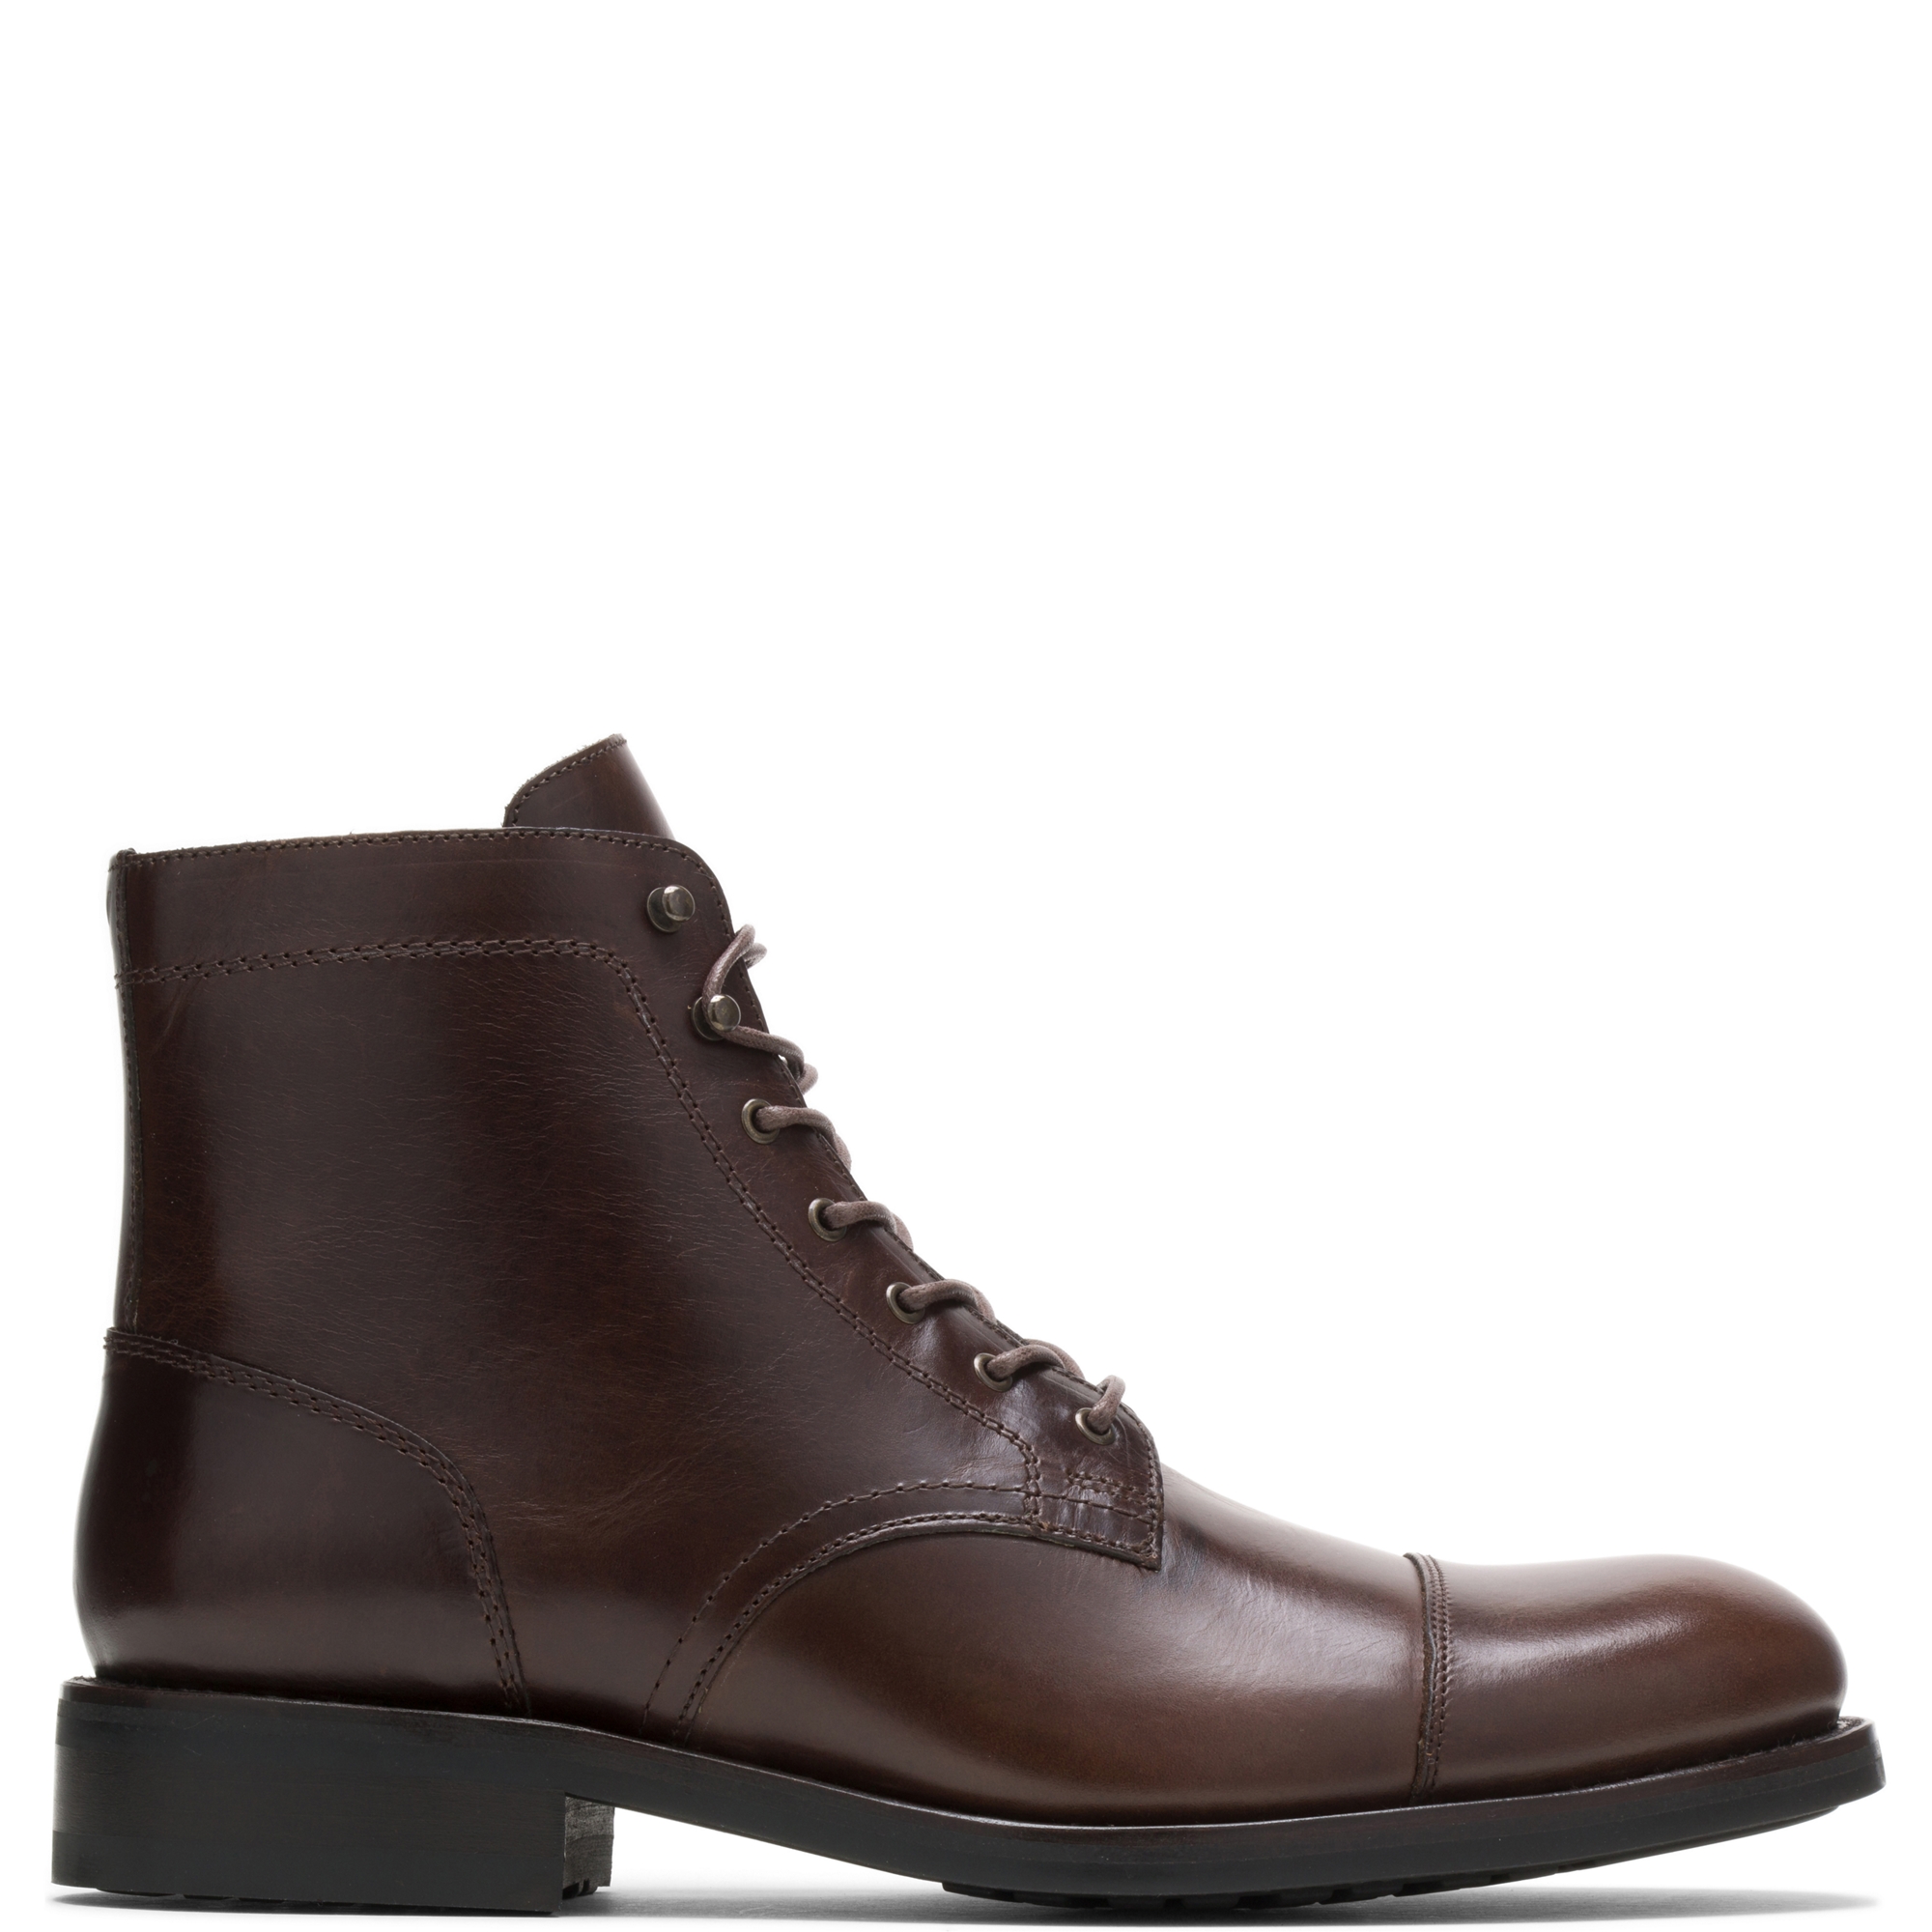 Wolverine Blvd Cap-Toe Boot W990090 Mens Brown Leather Casual Dress ...